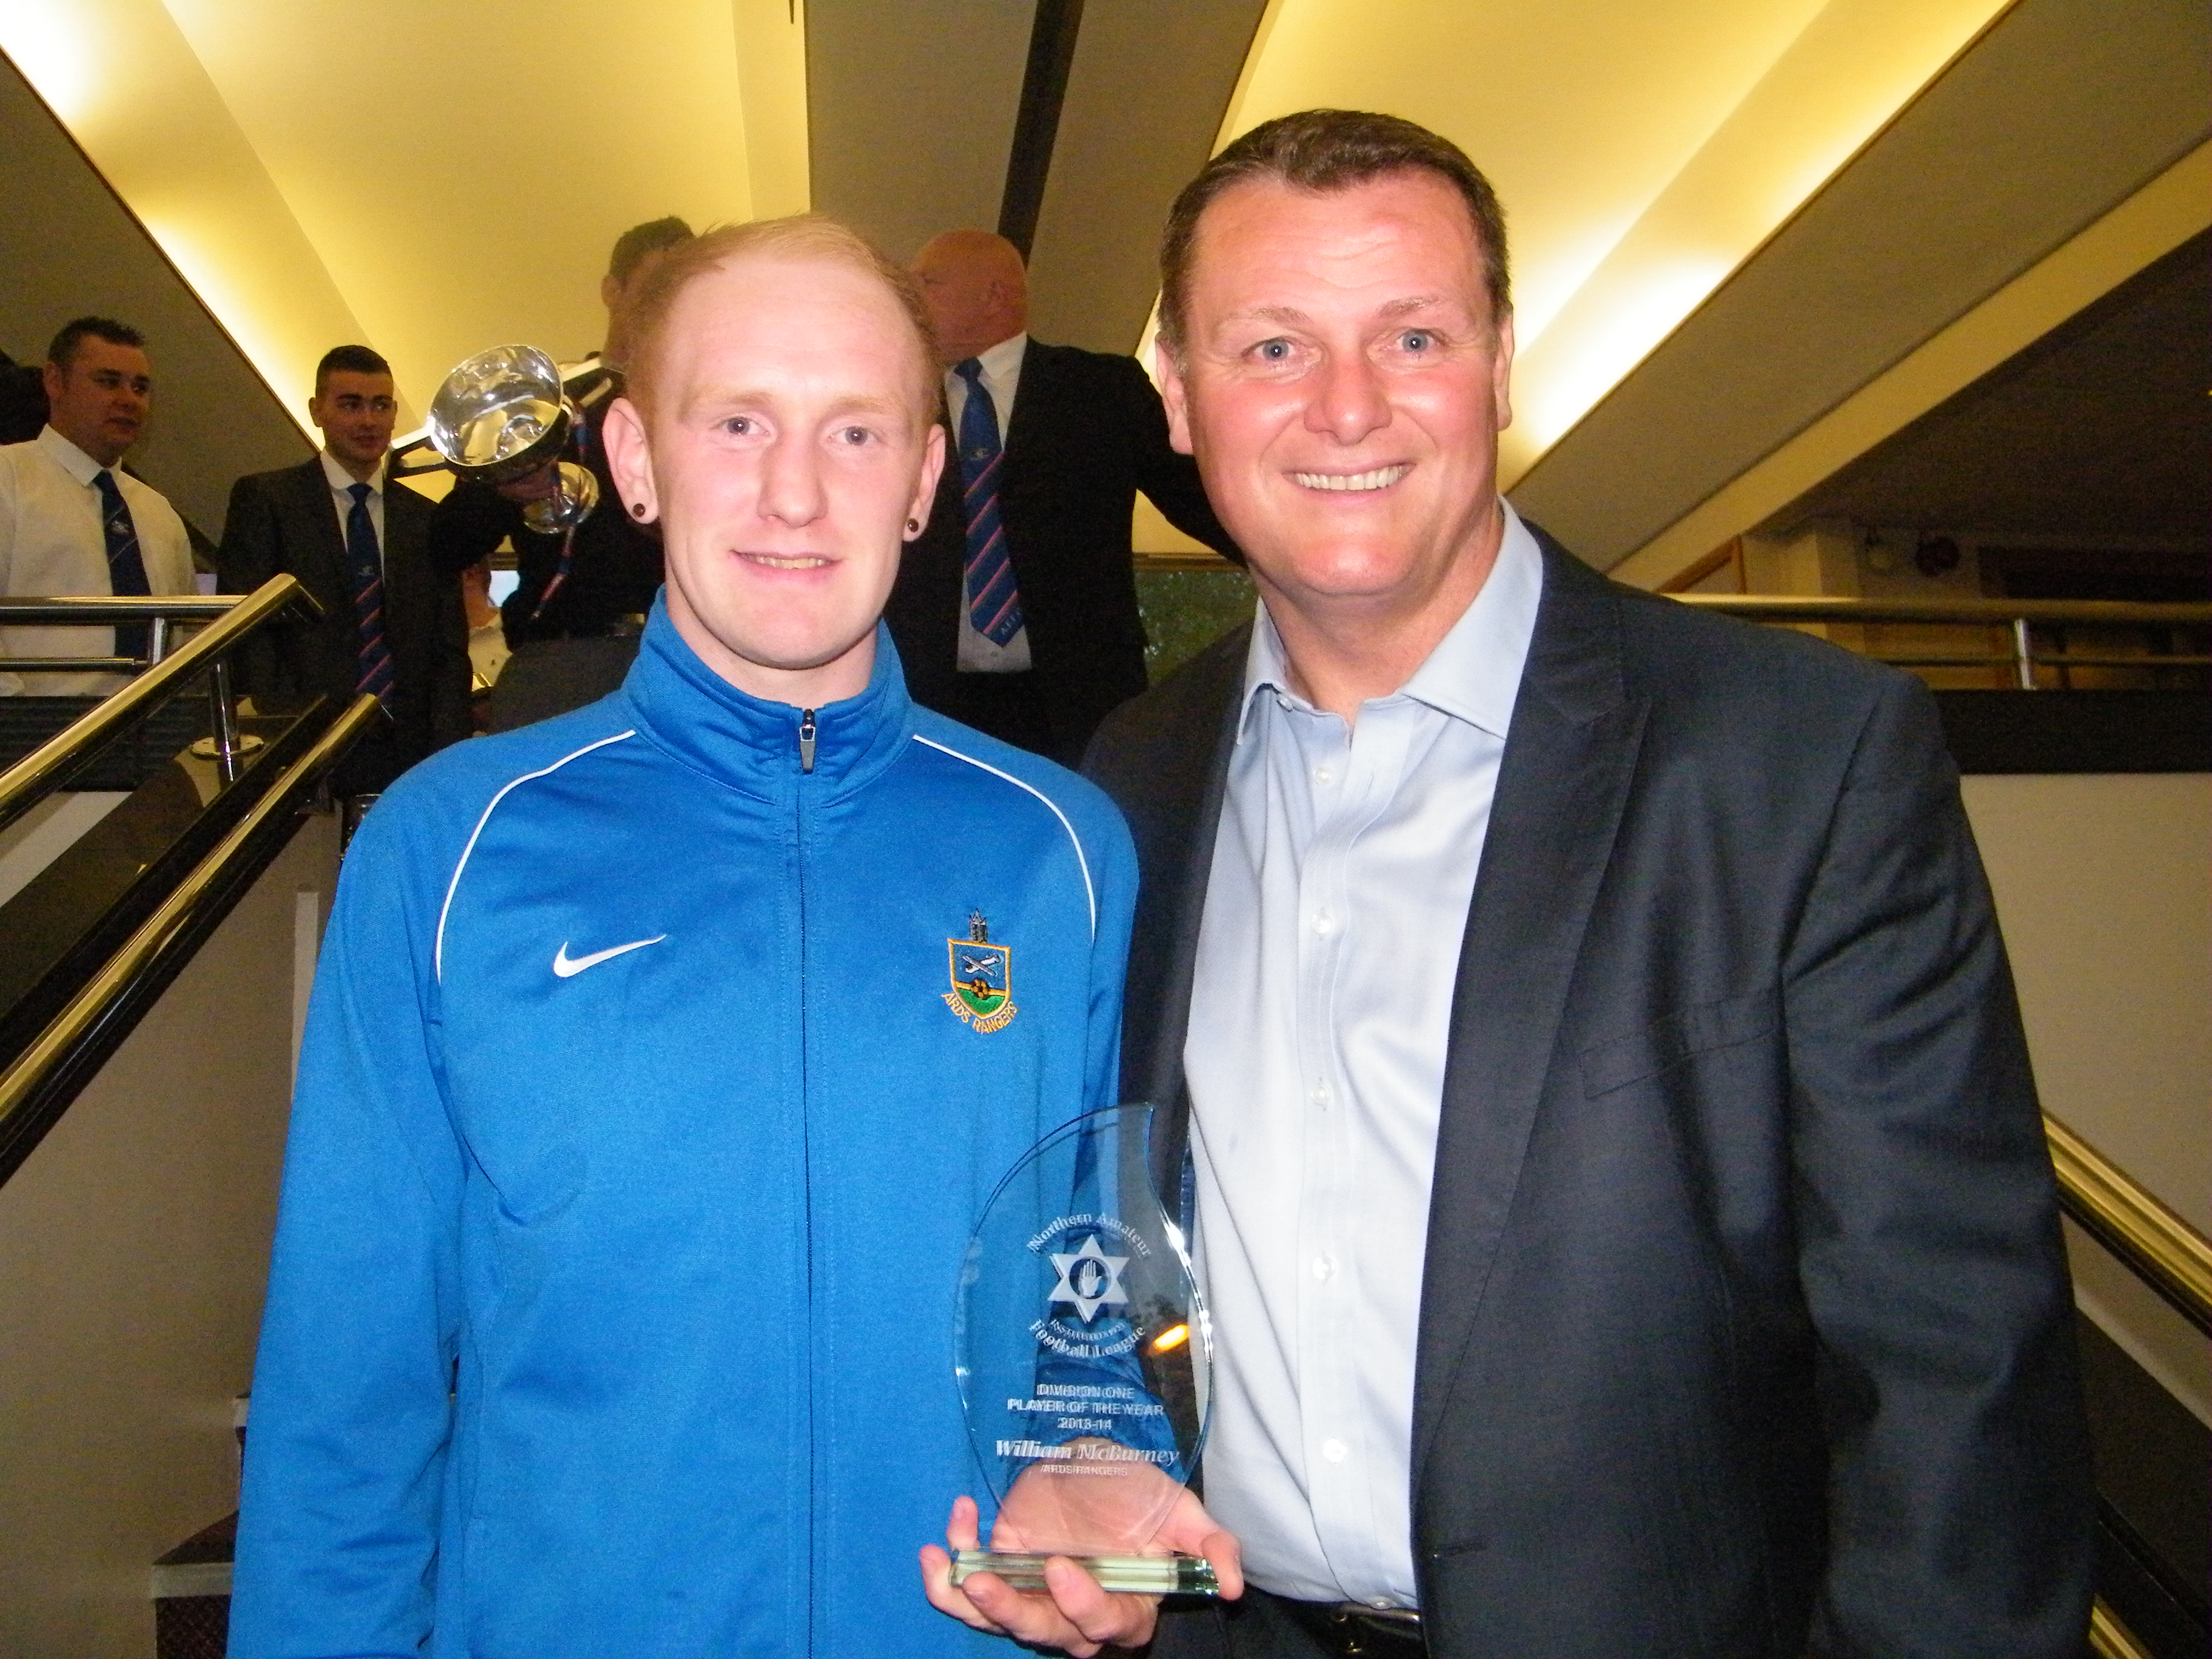 Ards Rangers William McBurney 1st Division Player of the Year